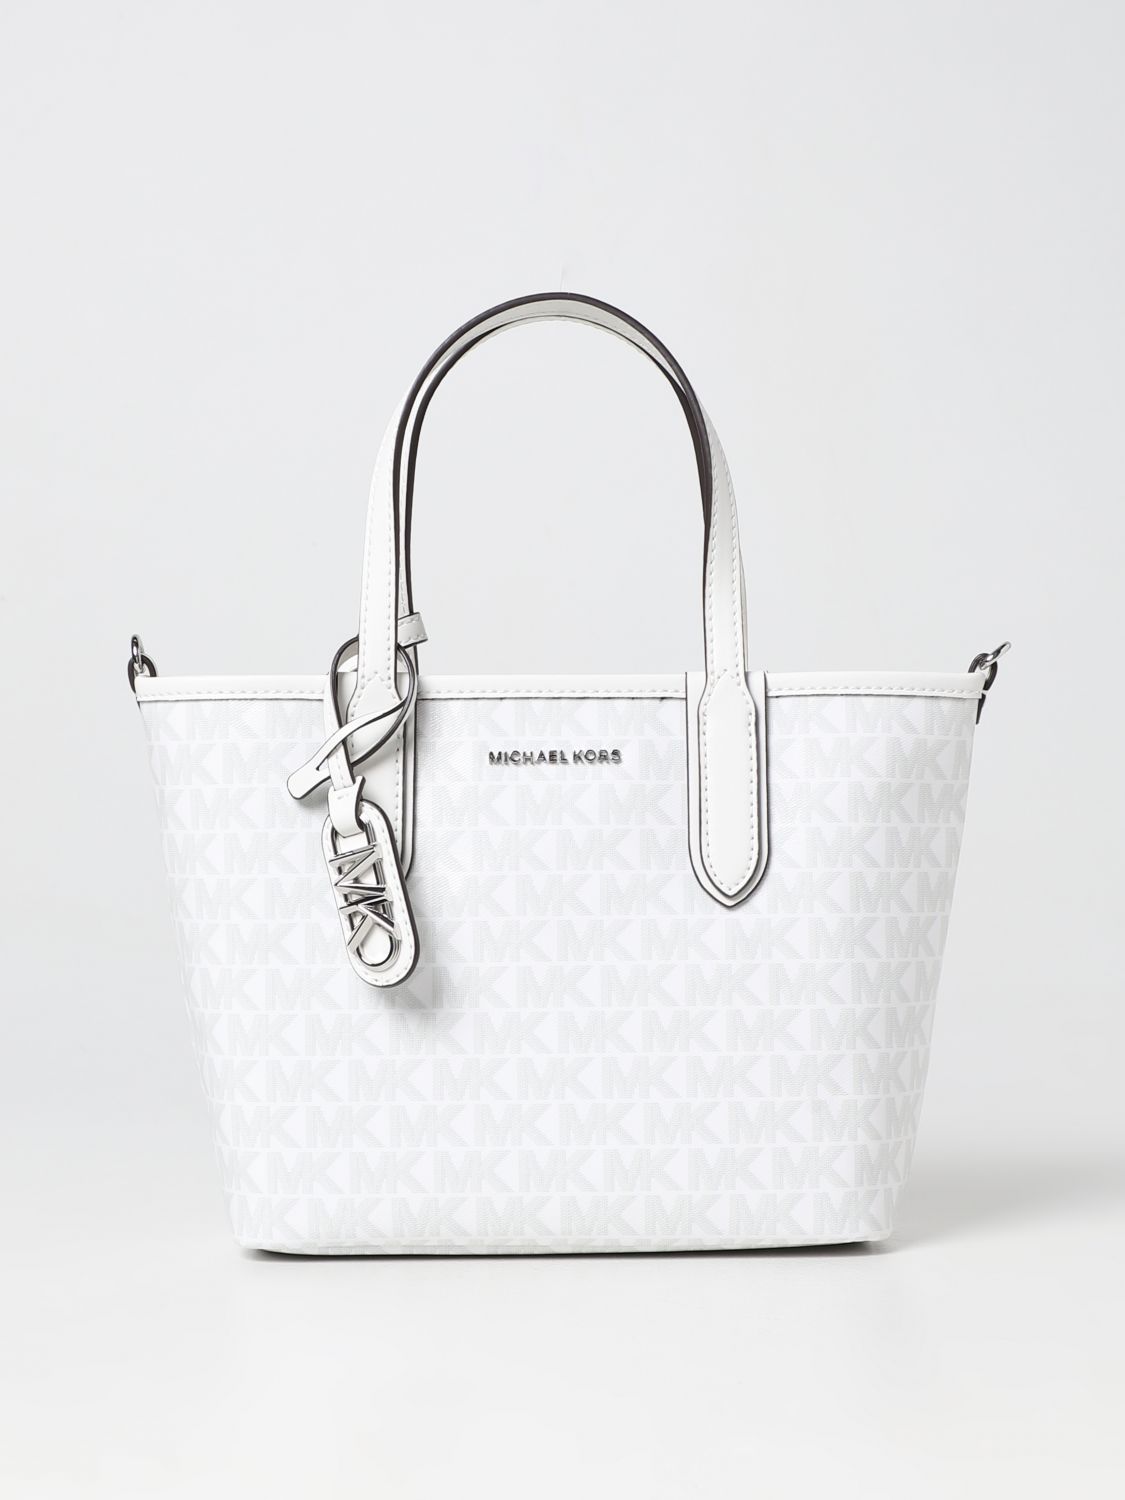 MICHAEL KORS tote bags for woman  White  Michael Kors tote bags  30R3S04T3B online on GIGLIOCOM